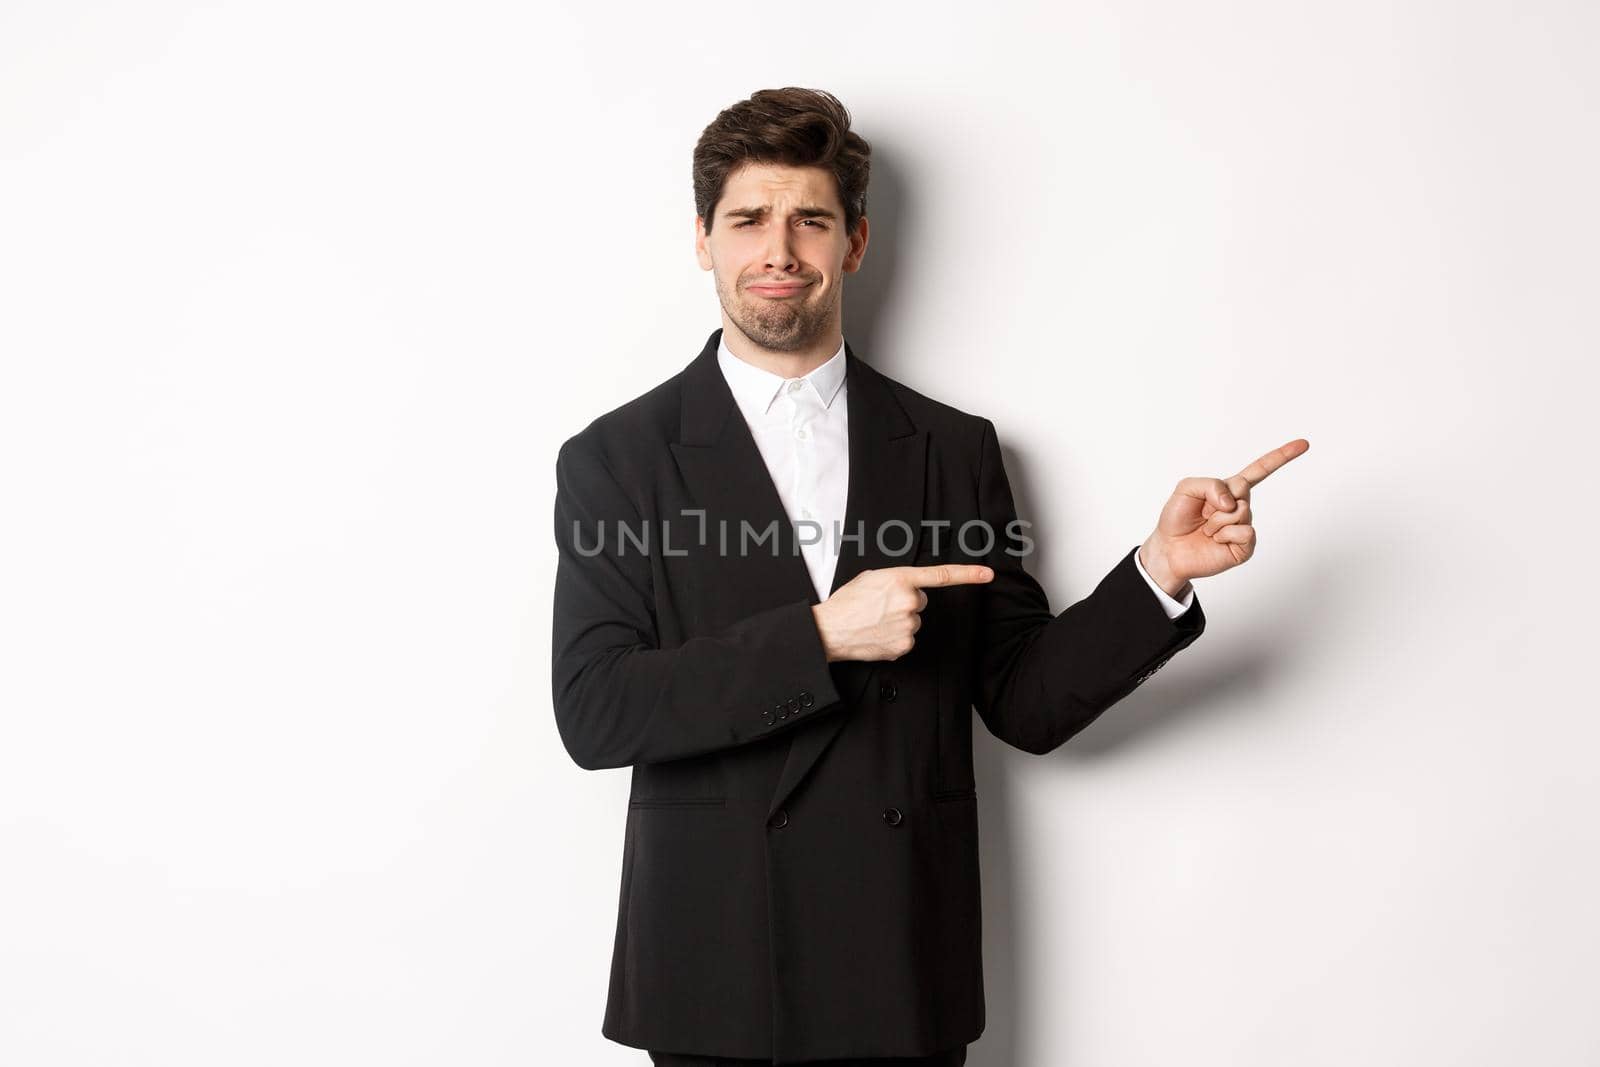 Image of devestated man in party suit, crying and complaining, pointing fingers right at something disappointing, standing over white background.